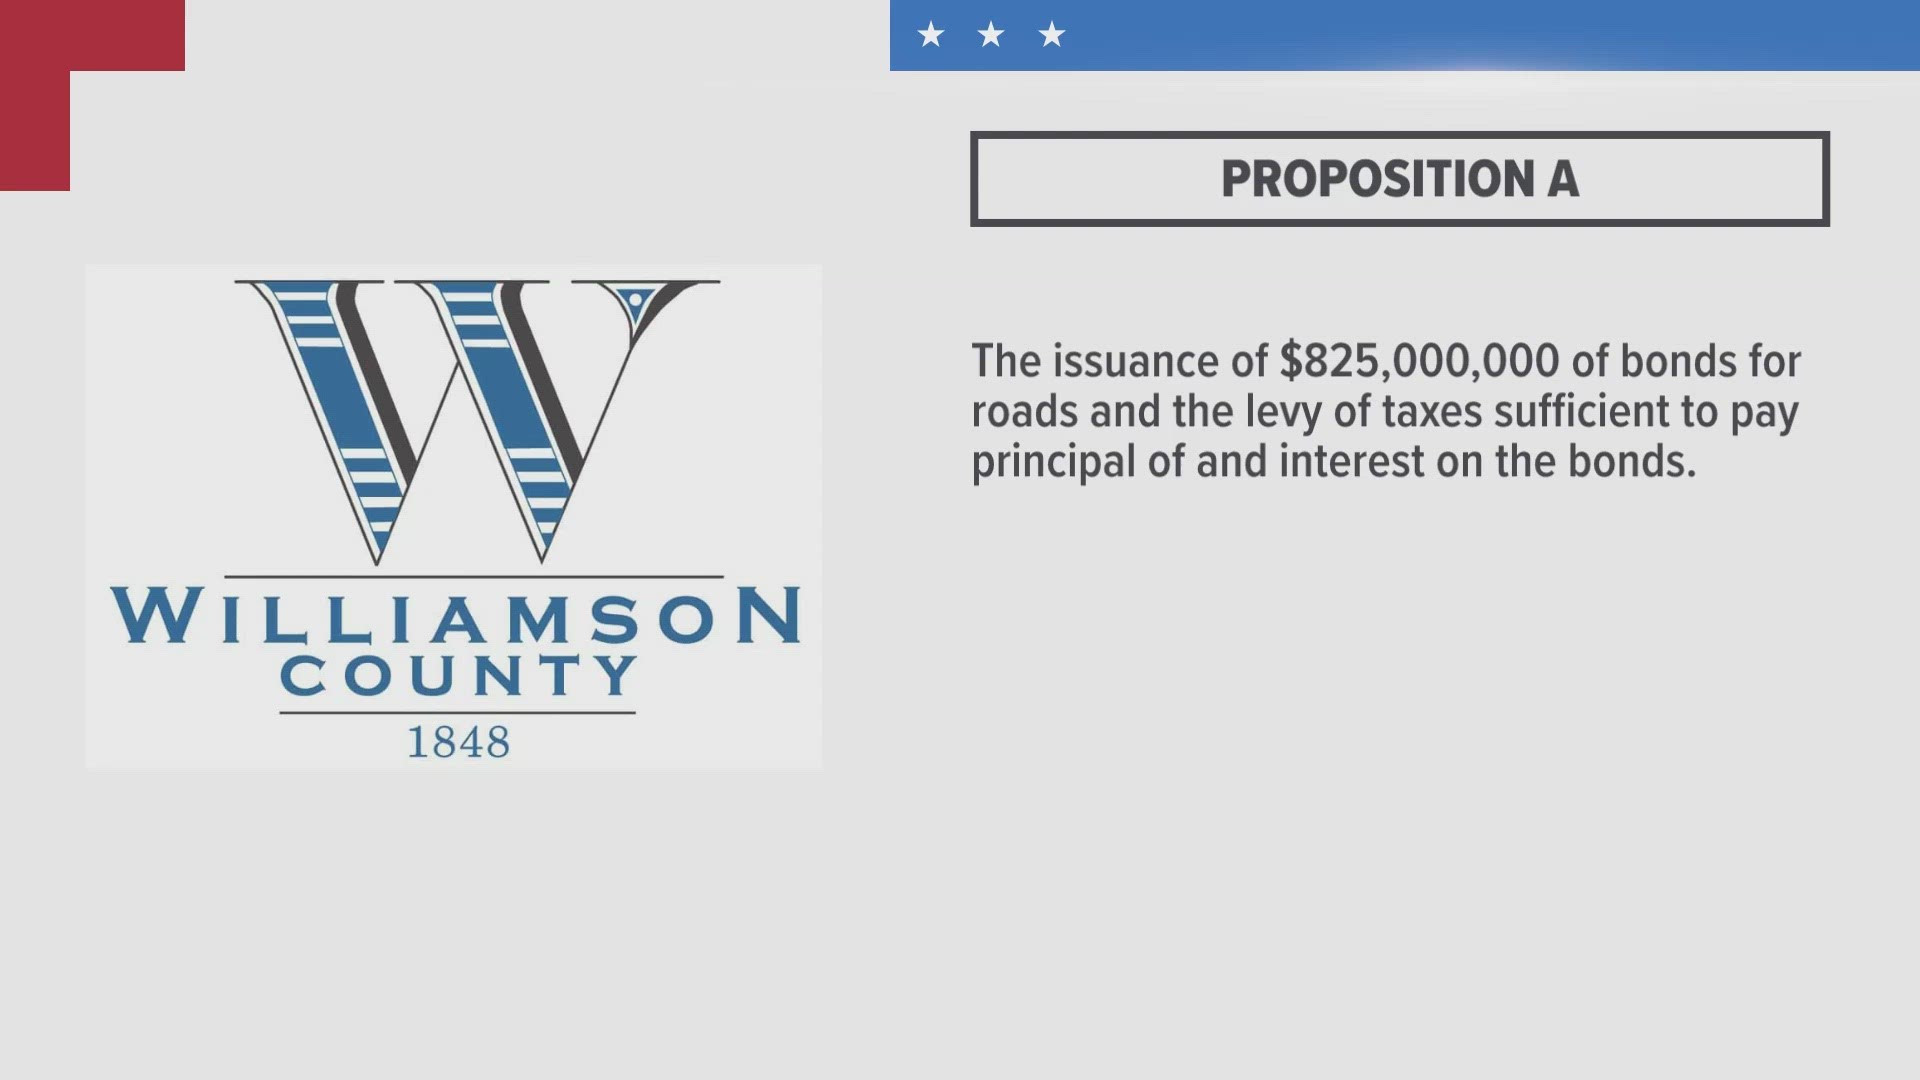 We're taking a look at what's on the Nov. 7 ballot in Williamson County. KVUE's Dominique Newland breaks down Propositions A and B.